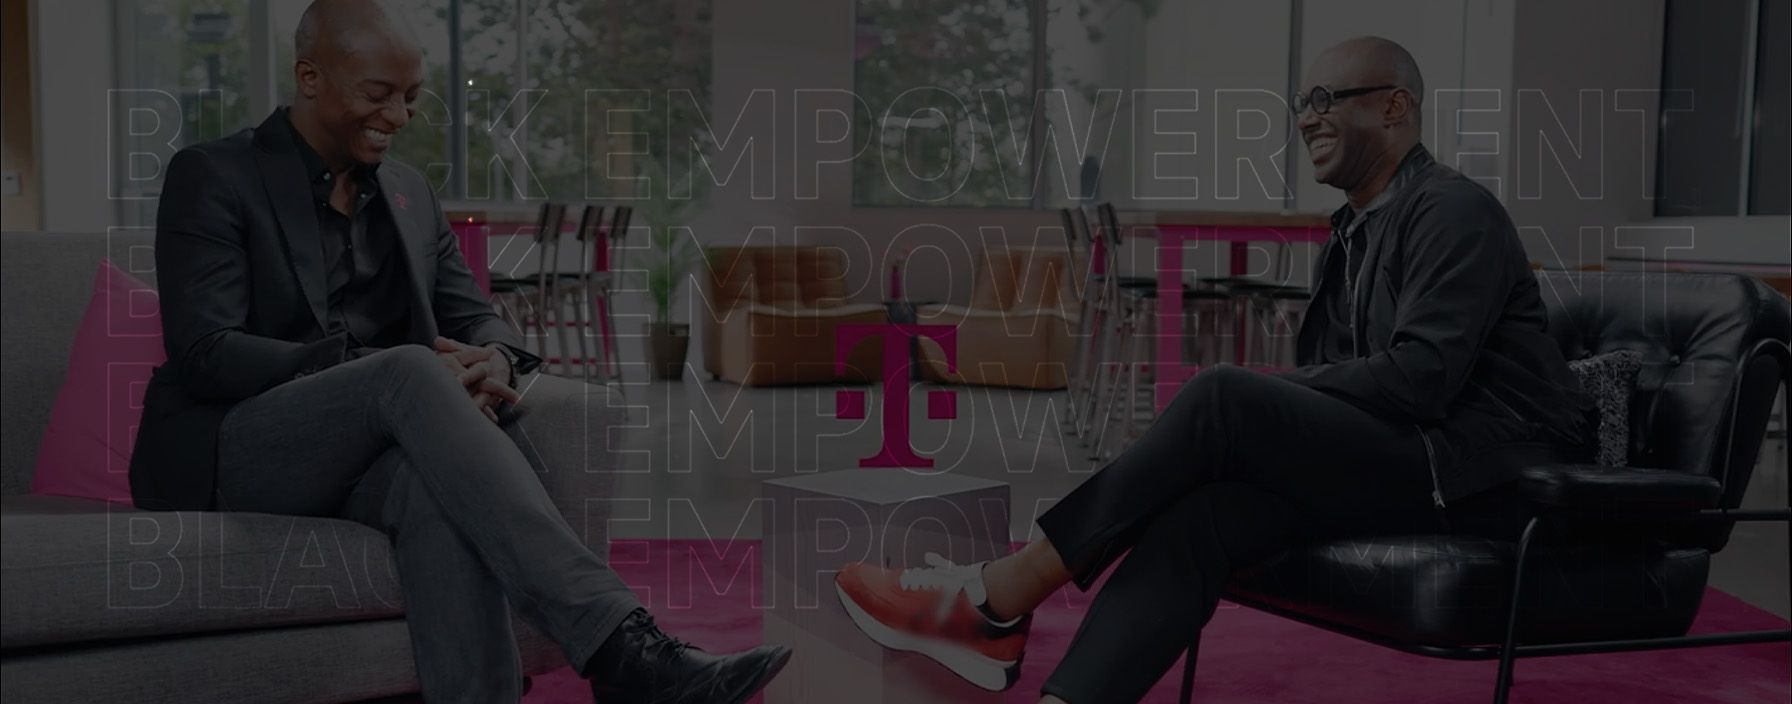 Maurice James, Vice President of Marketing at T-Mobile, sits across from Chief Digital Officer Marcus East.